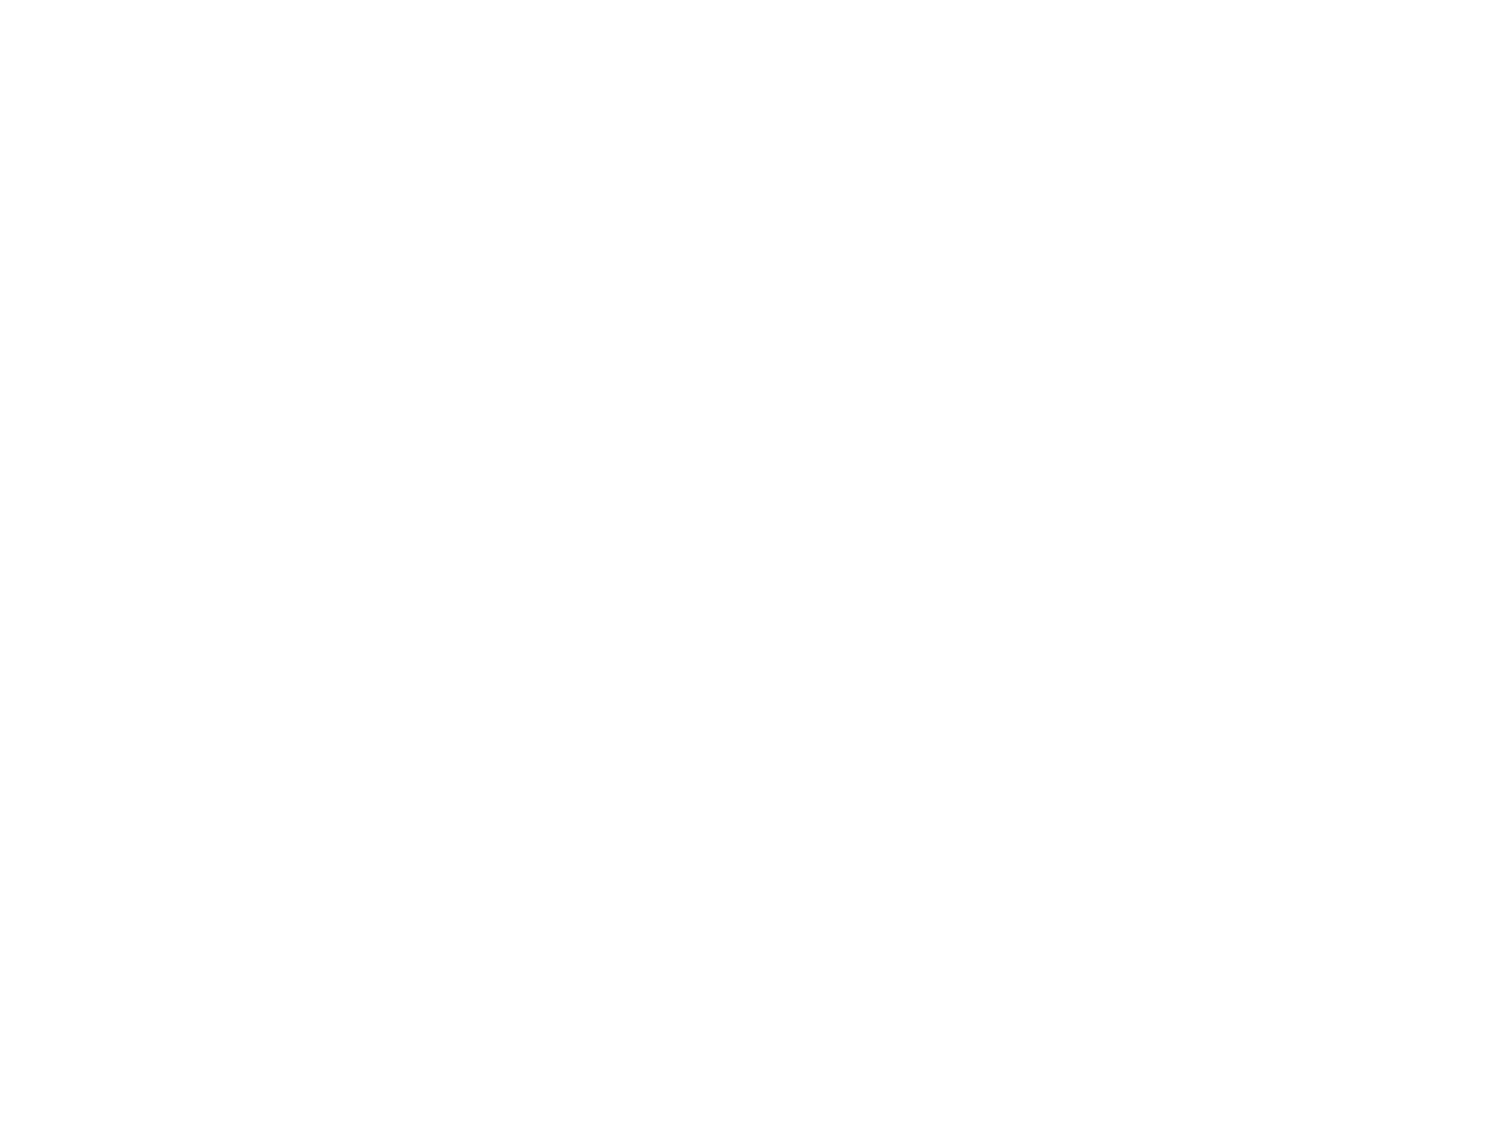 Areas of Effect